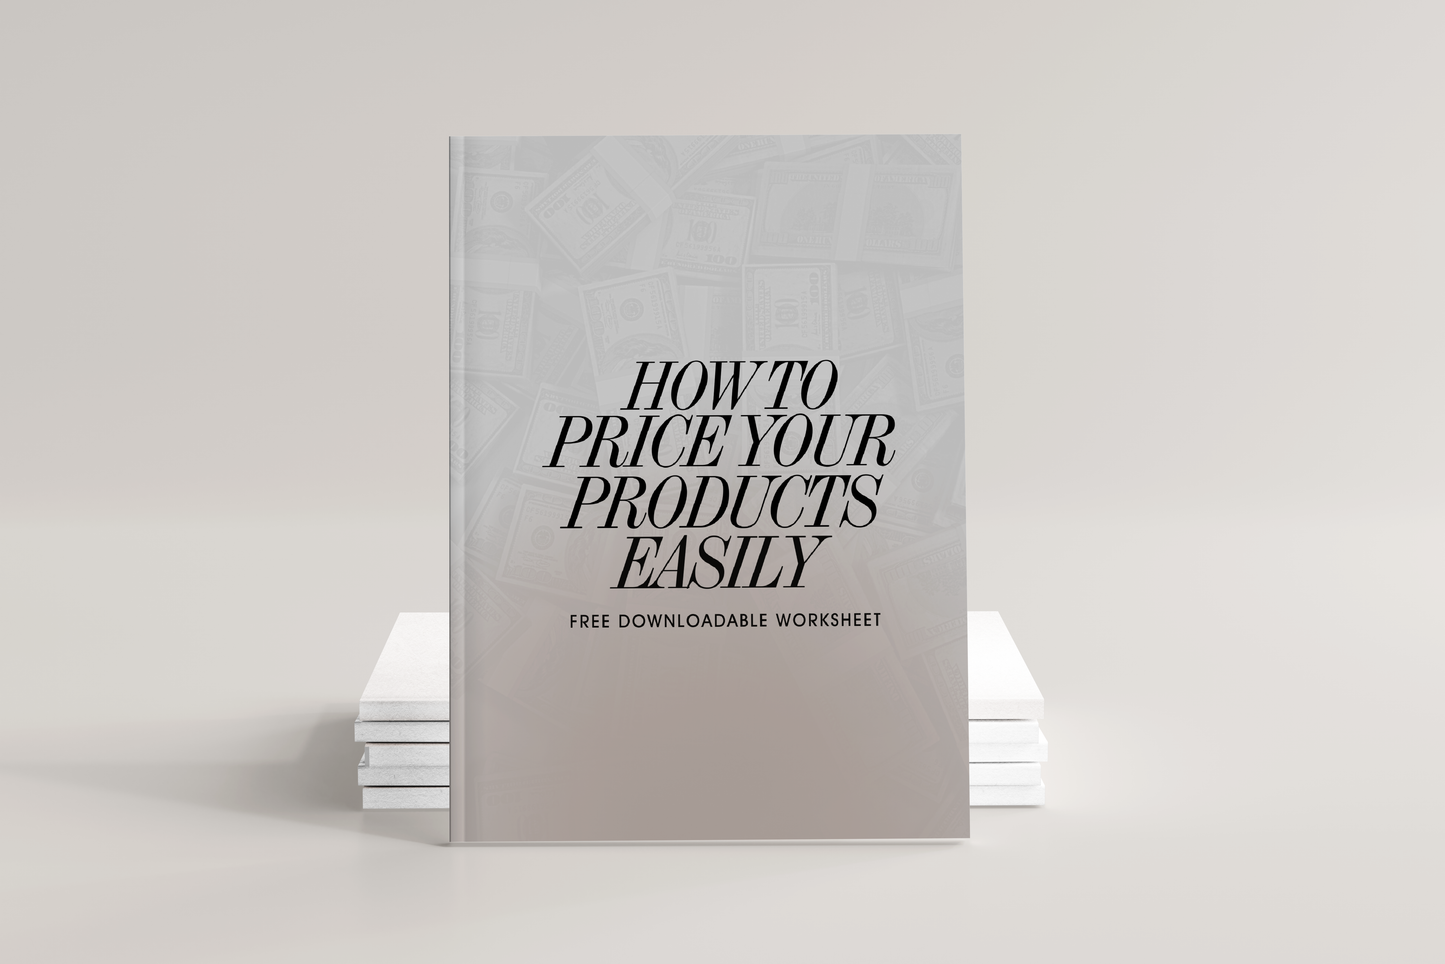 How to Price Your Products FREE GUIDE